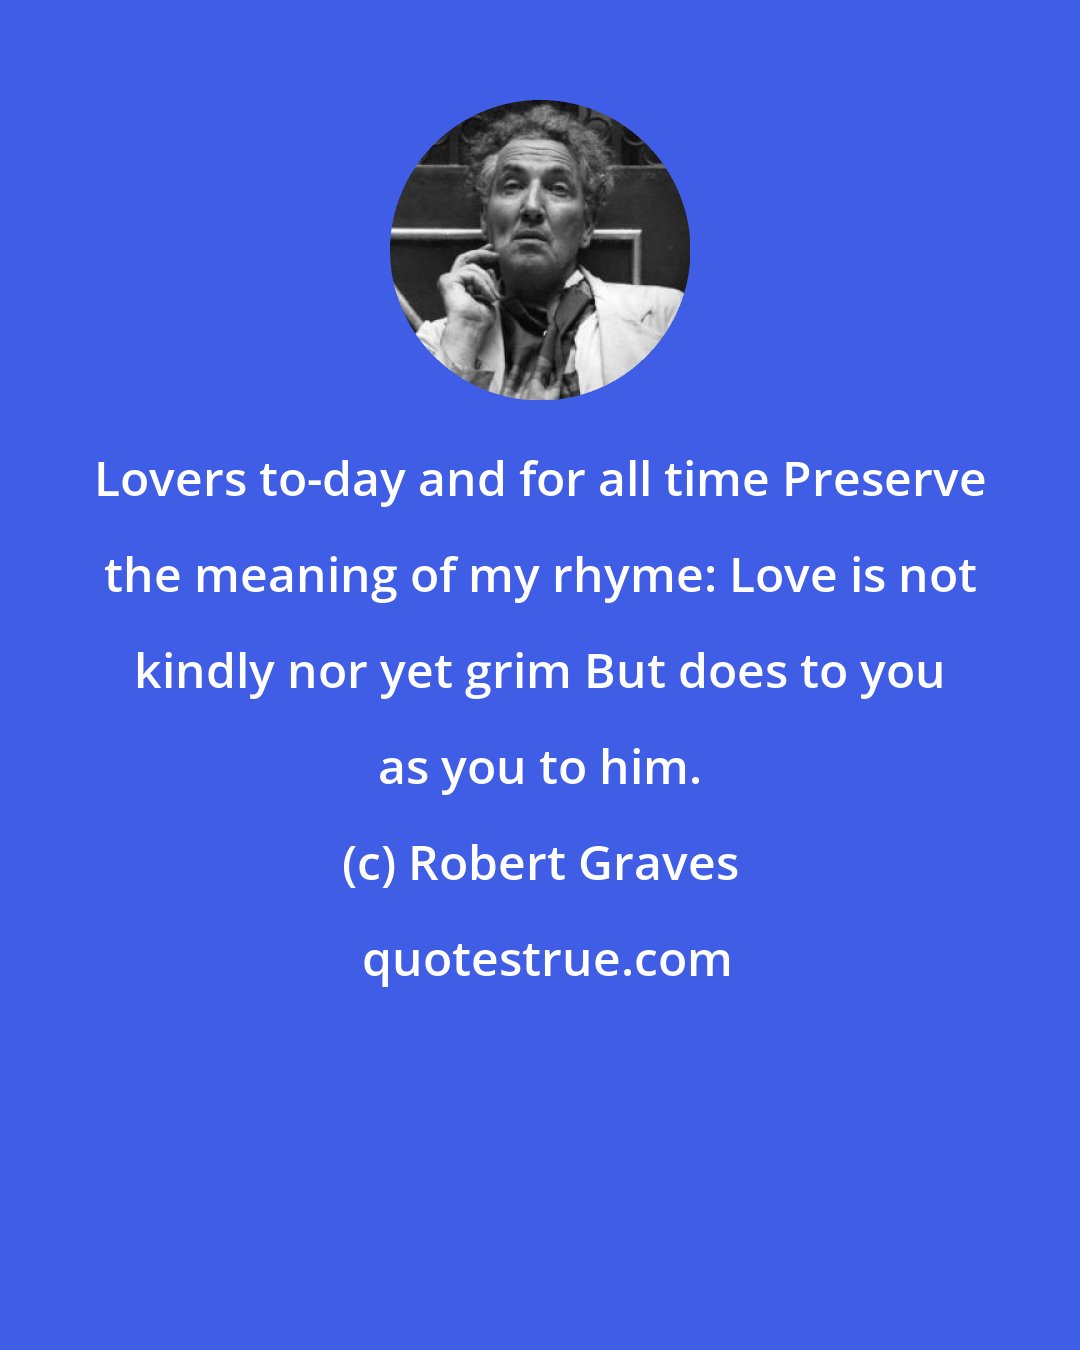 Robert Graves: Lovers to-day and for all time Preserve the meaning of my rhyme: Love is not kindly nor yet grim But does to you as you to him.